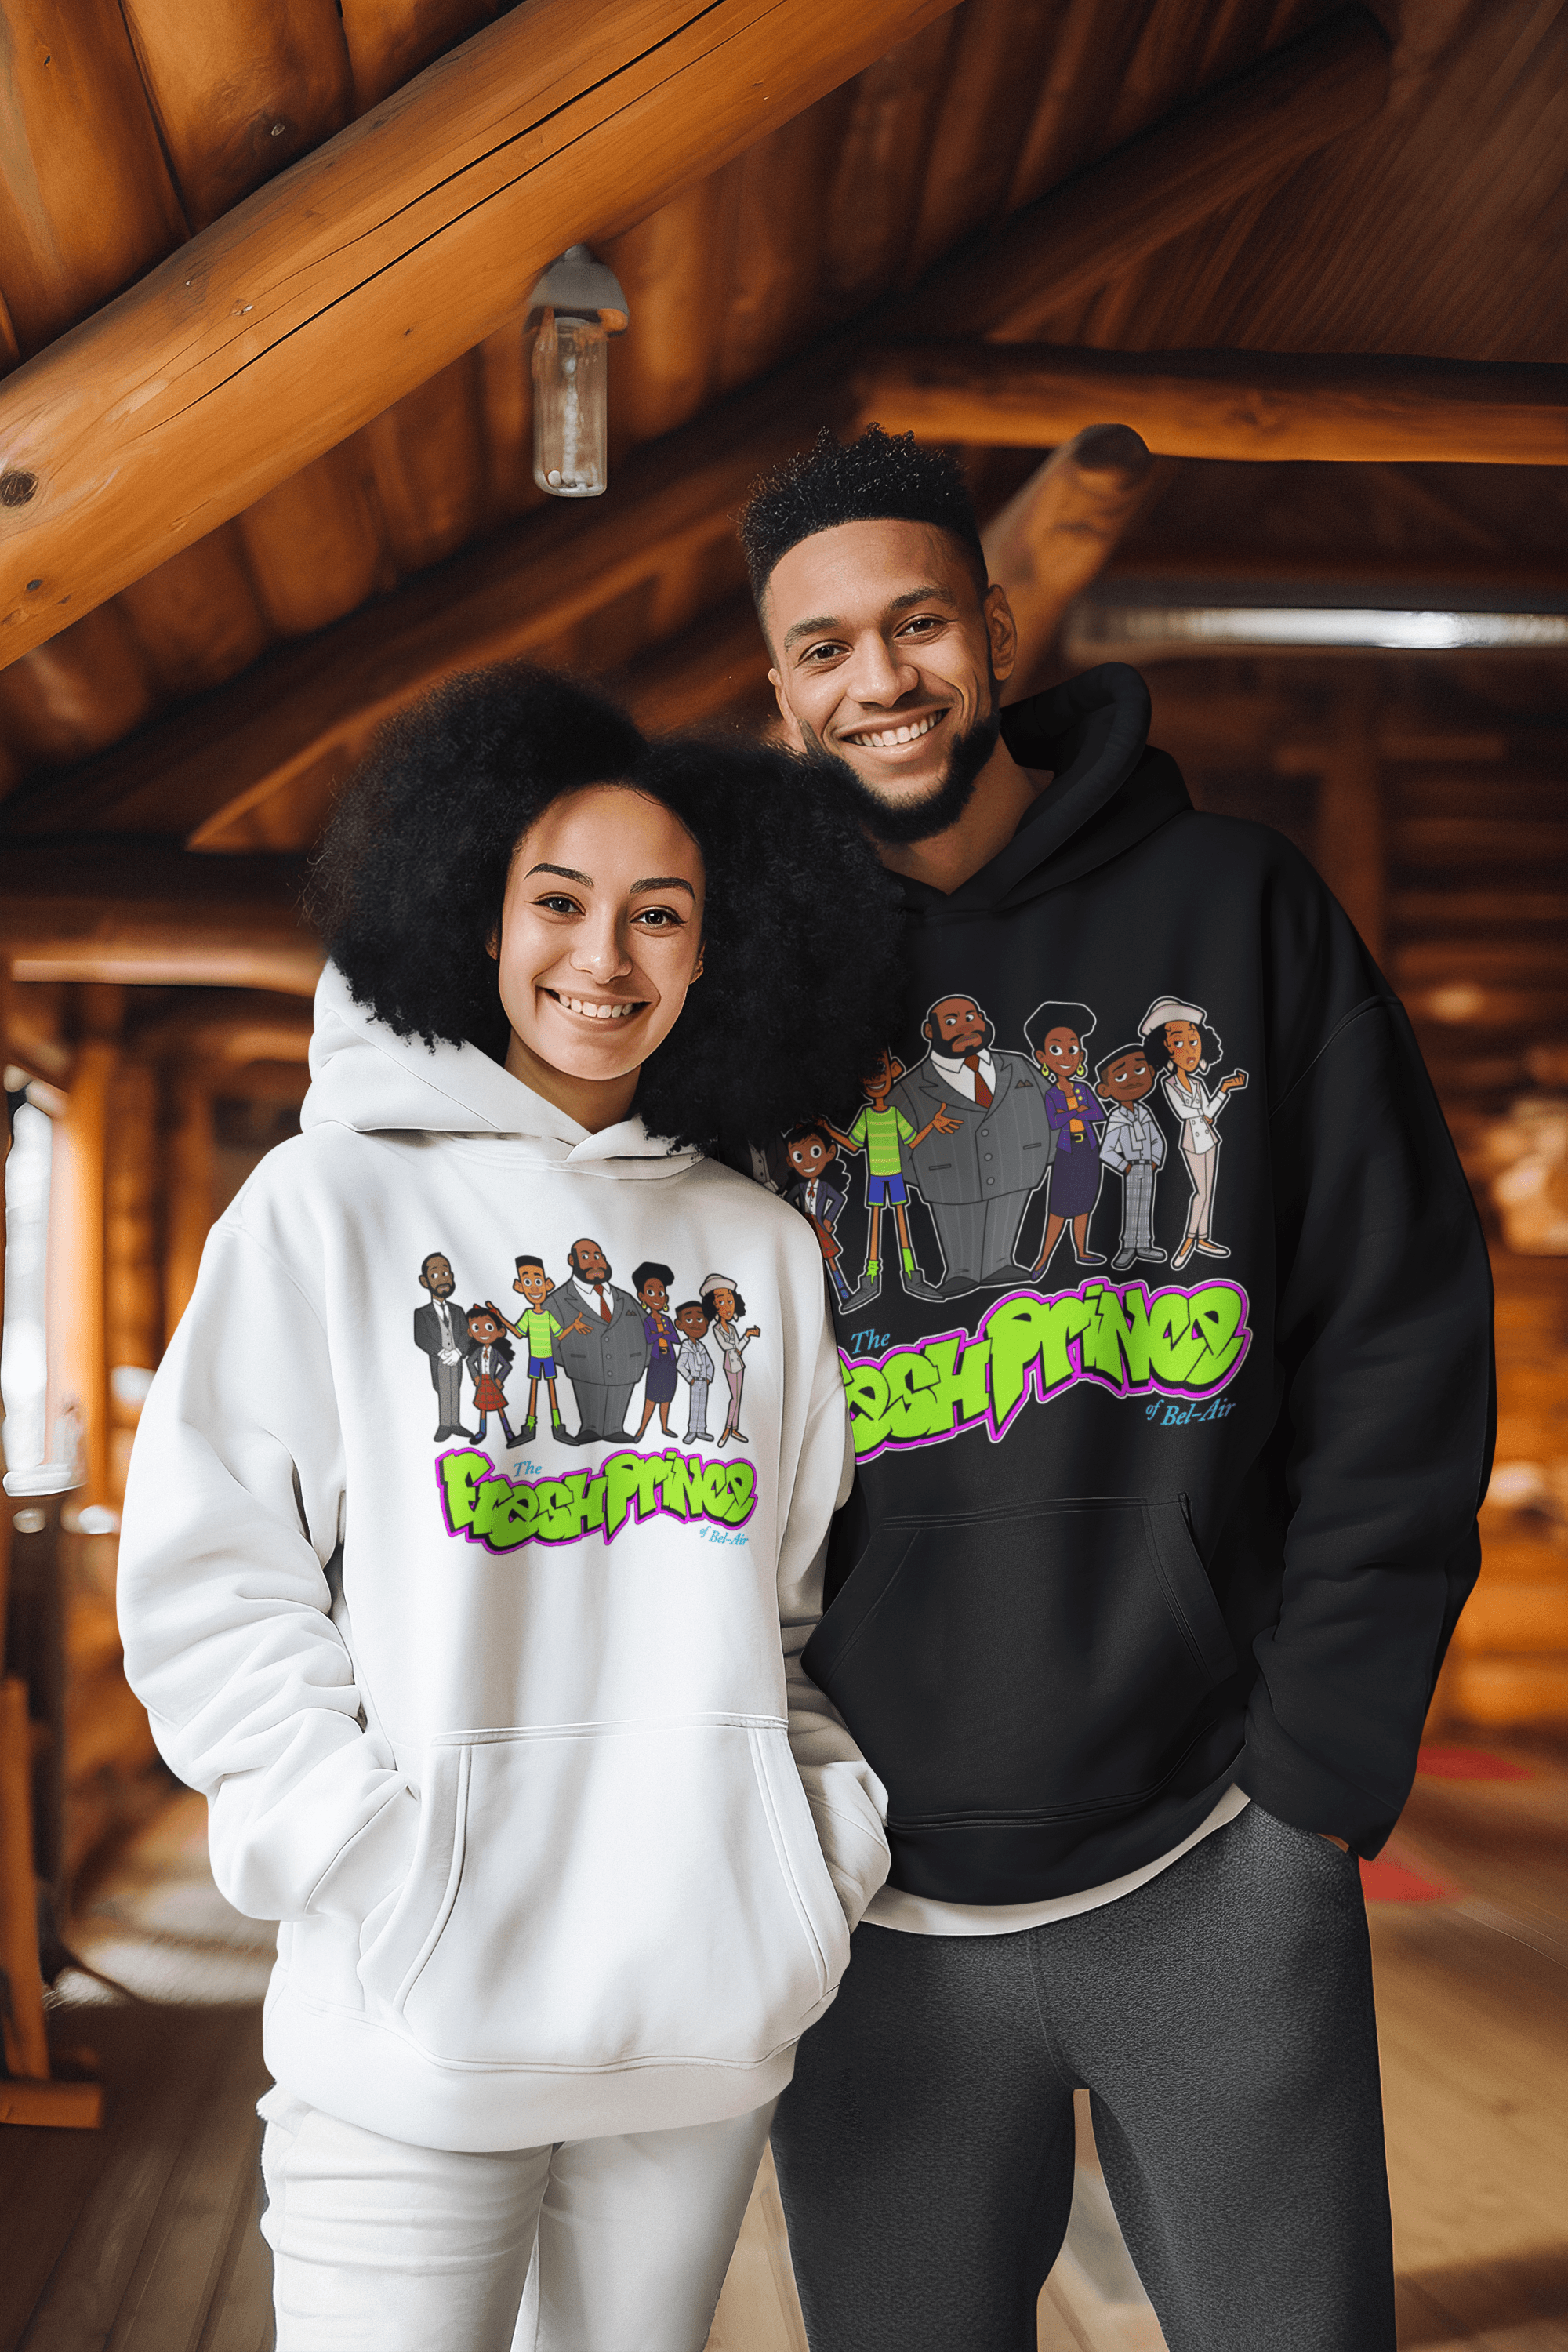 90s' Black TV Sitcom Animated Cast Blended Cotton MidWeight Pullover - TopKoalaTee